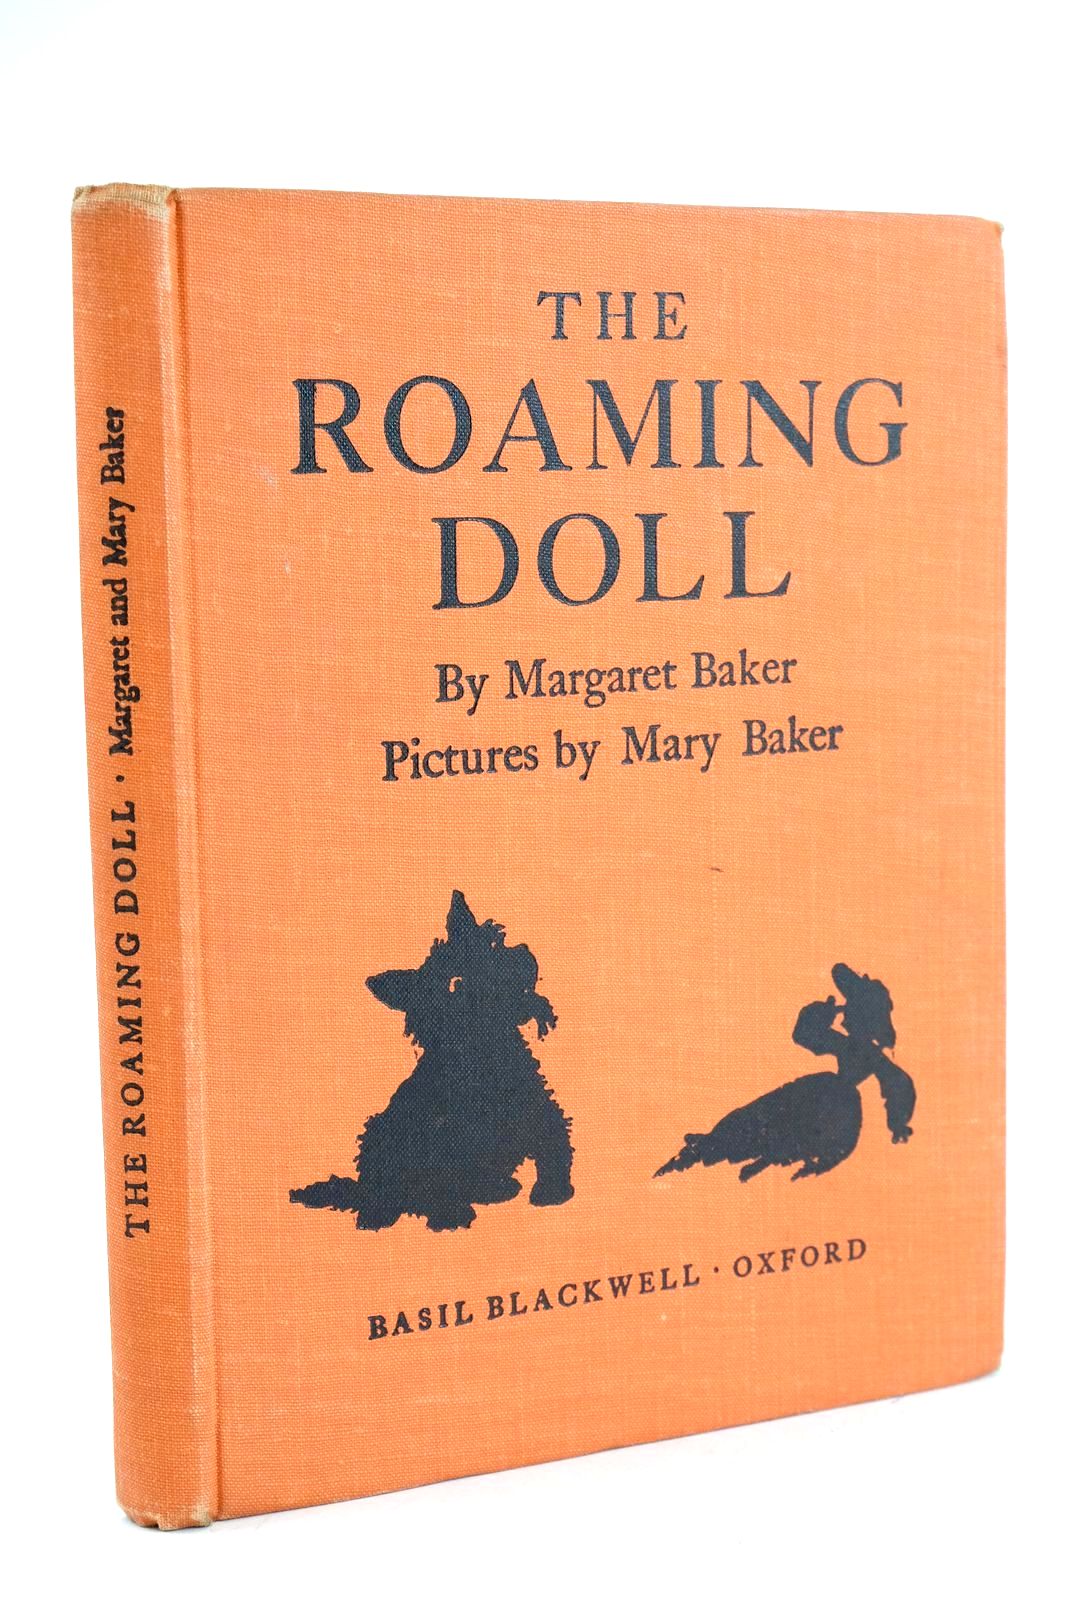 Photo of THE ROAMING DOLL written by Baker, Margaret illustrated by Baker, Mary published by Basil Blackwell (STOCK CODE: 1324902)  for sale by Stella & Rose's Books